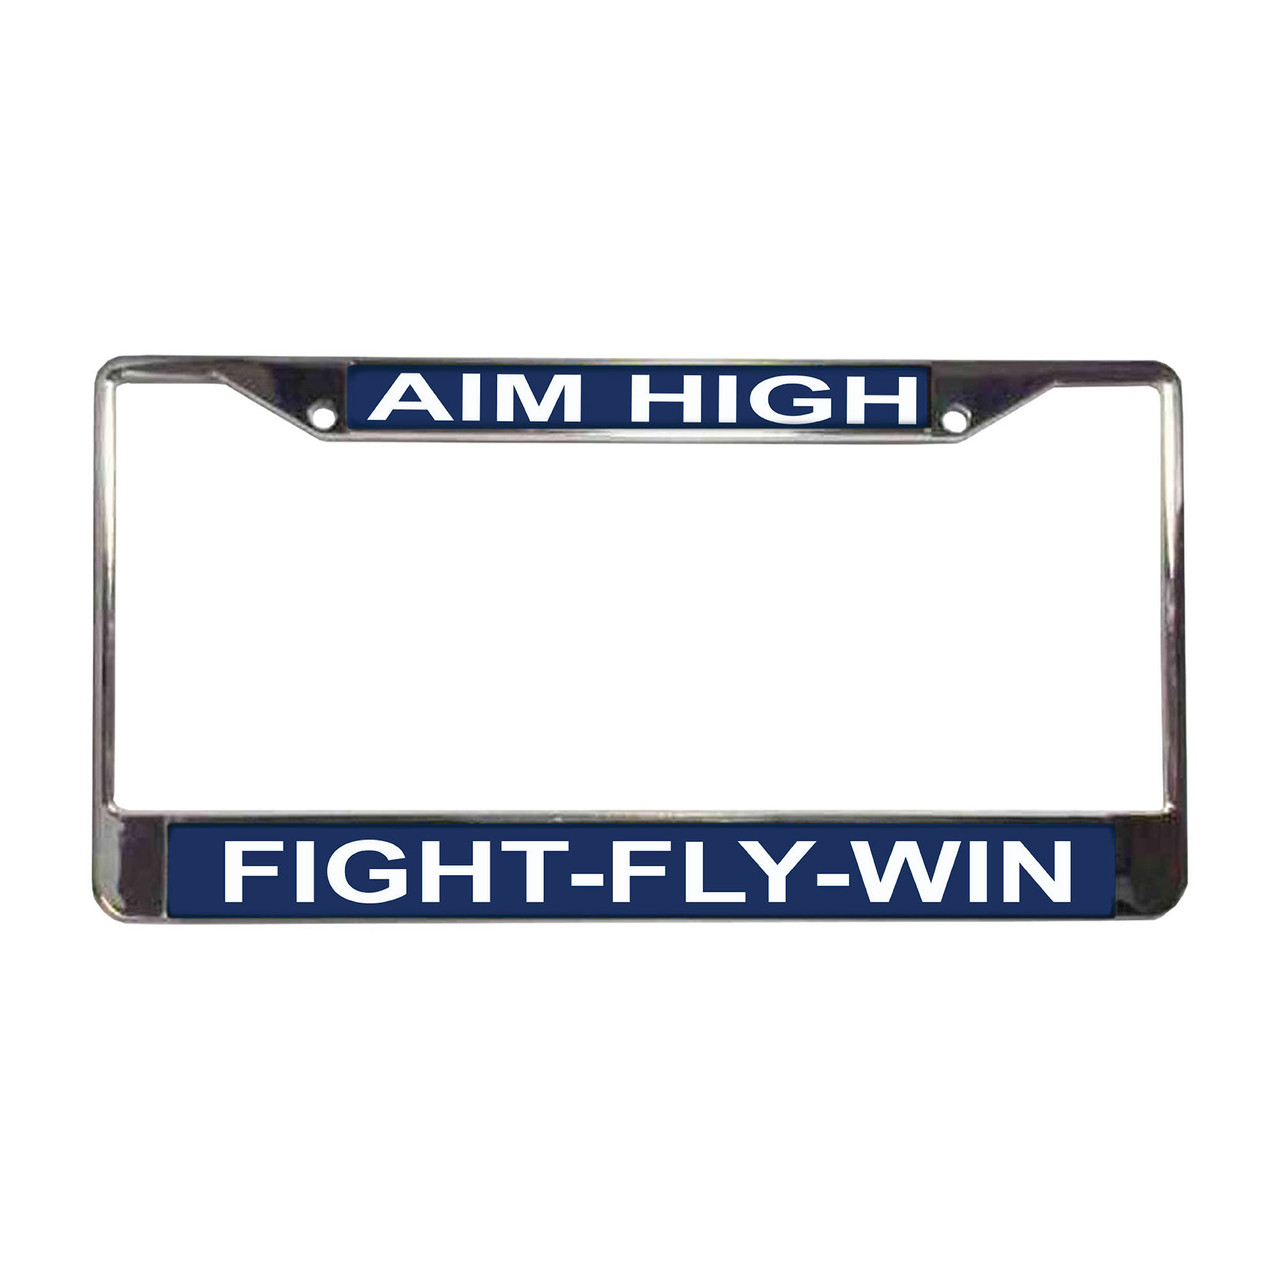 air force aim high license plate frame - front view